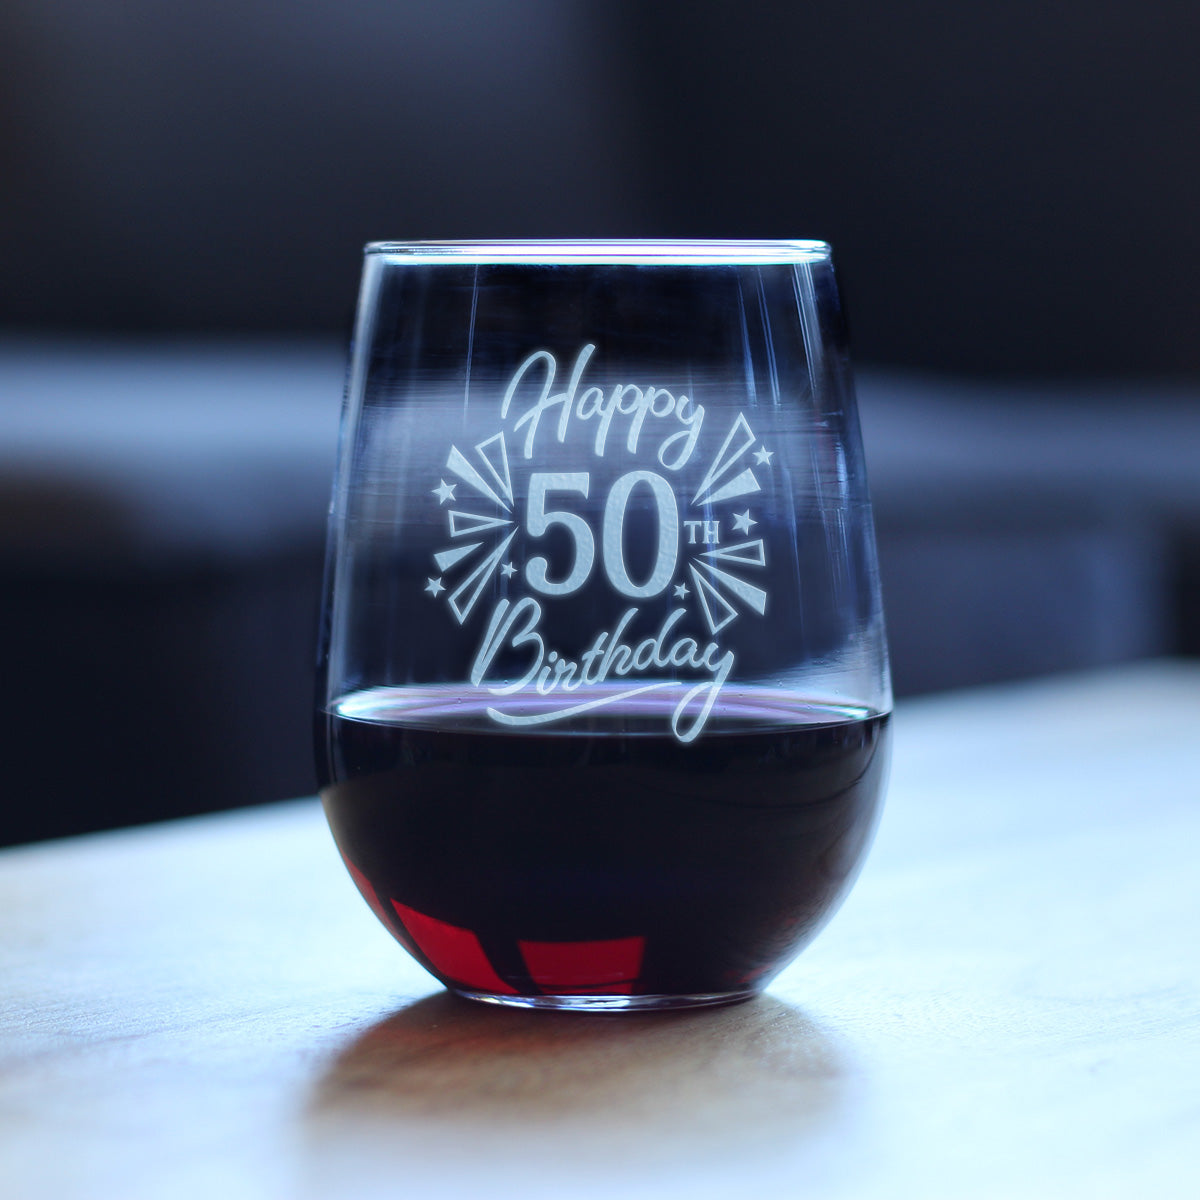 Happy 50th Birthday - Stemless Wine Glass Gifts for Women &amp; Men Turning 50 - Bday Party Decor - Large Glasses 17 Oz